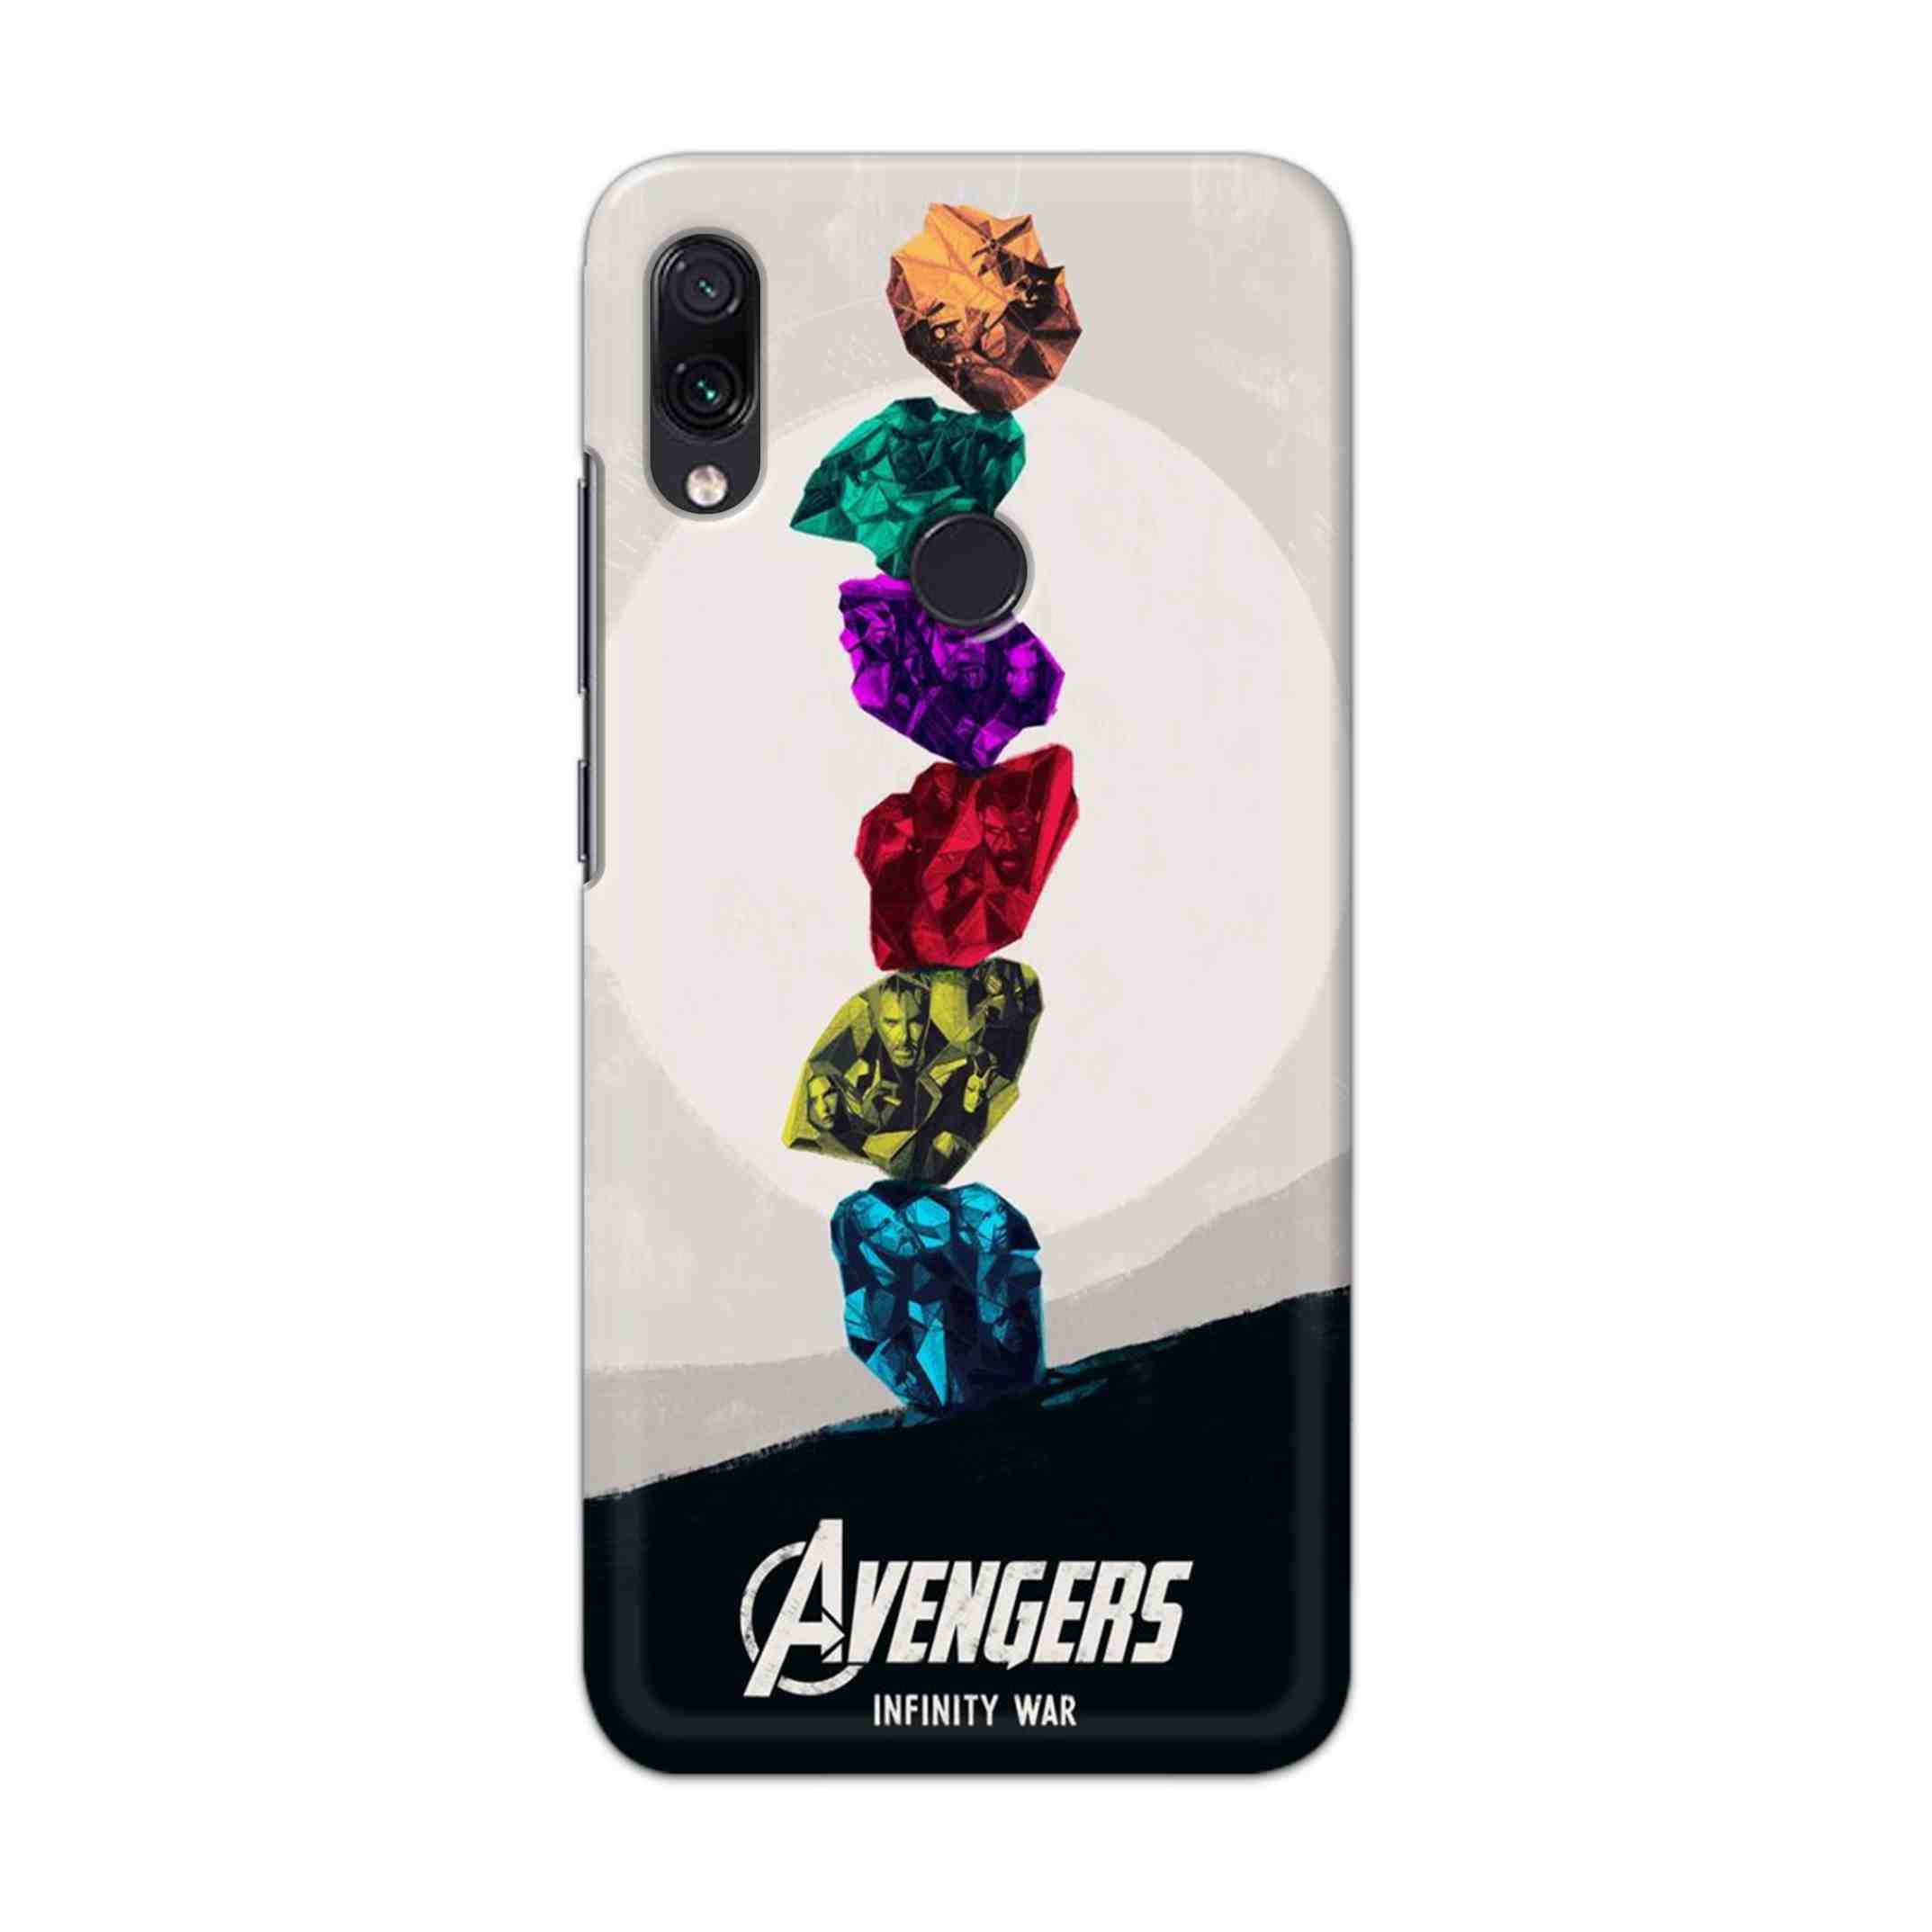 Buy Avengers Stone Hard Back Mobile Phone Case Cover For Redmi Note 7 / Note 7 Pro Online